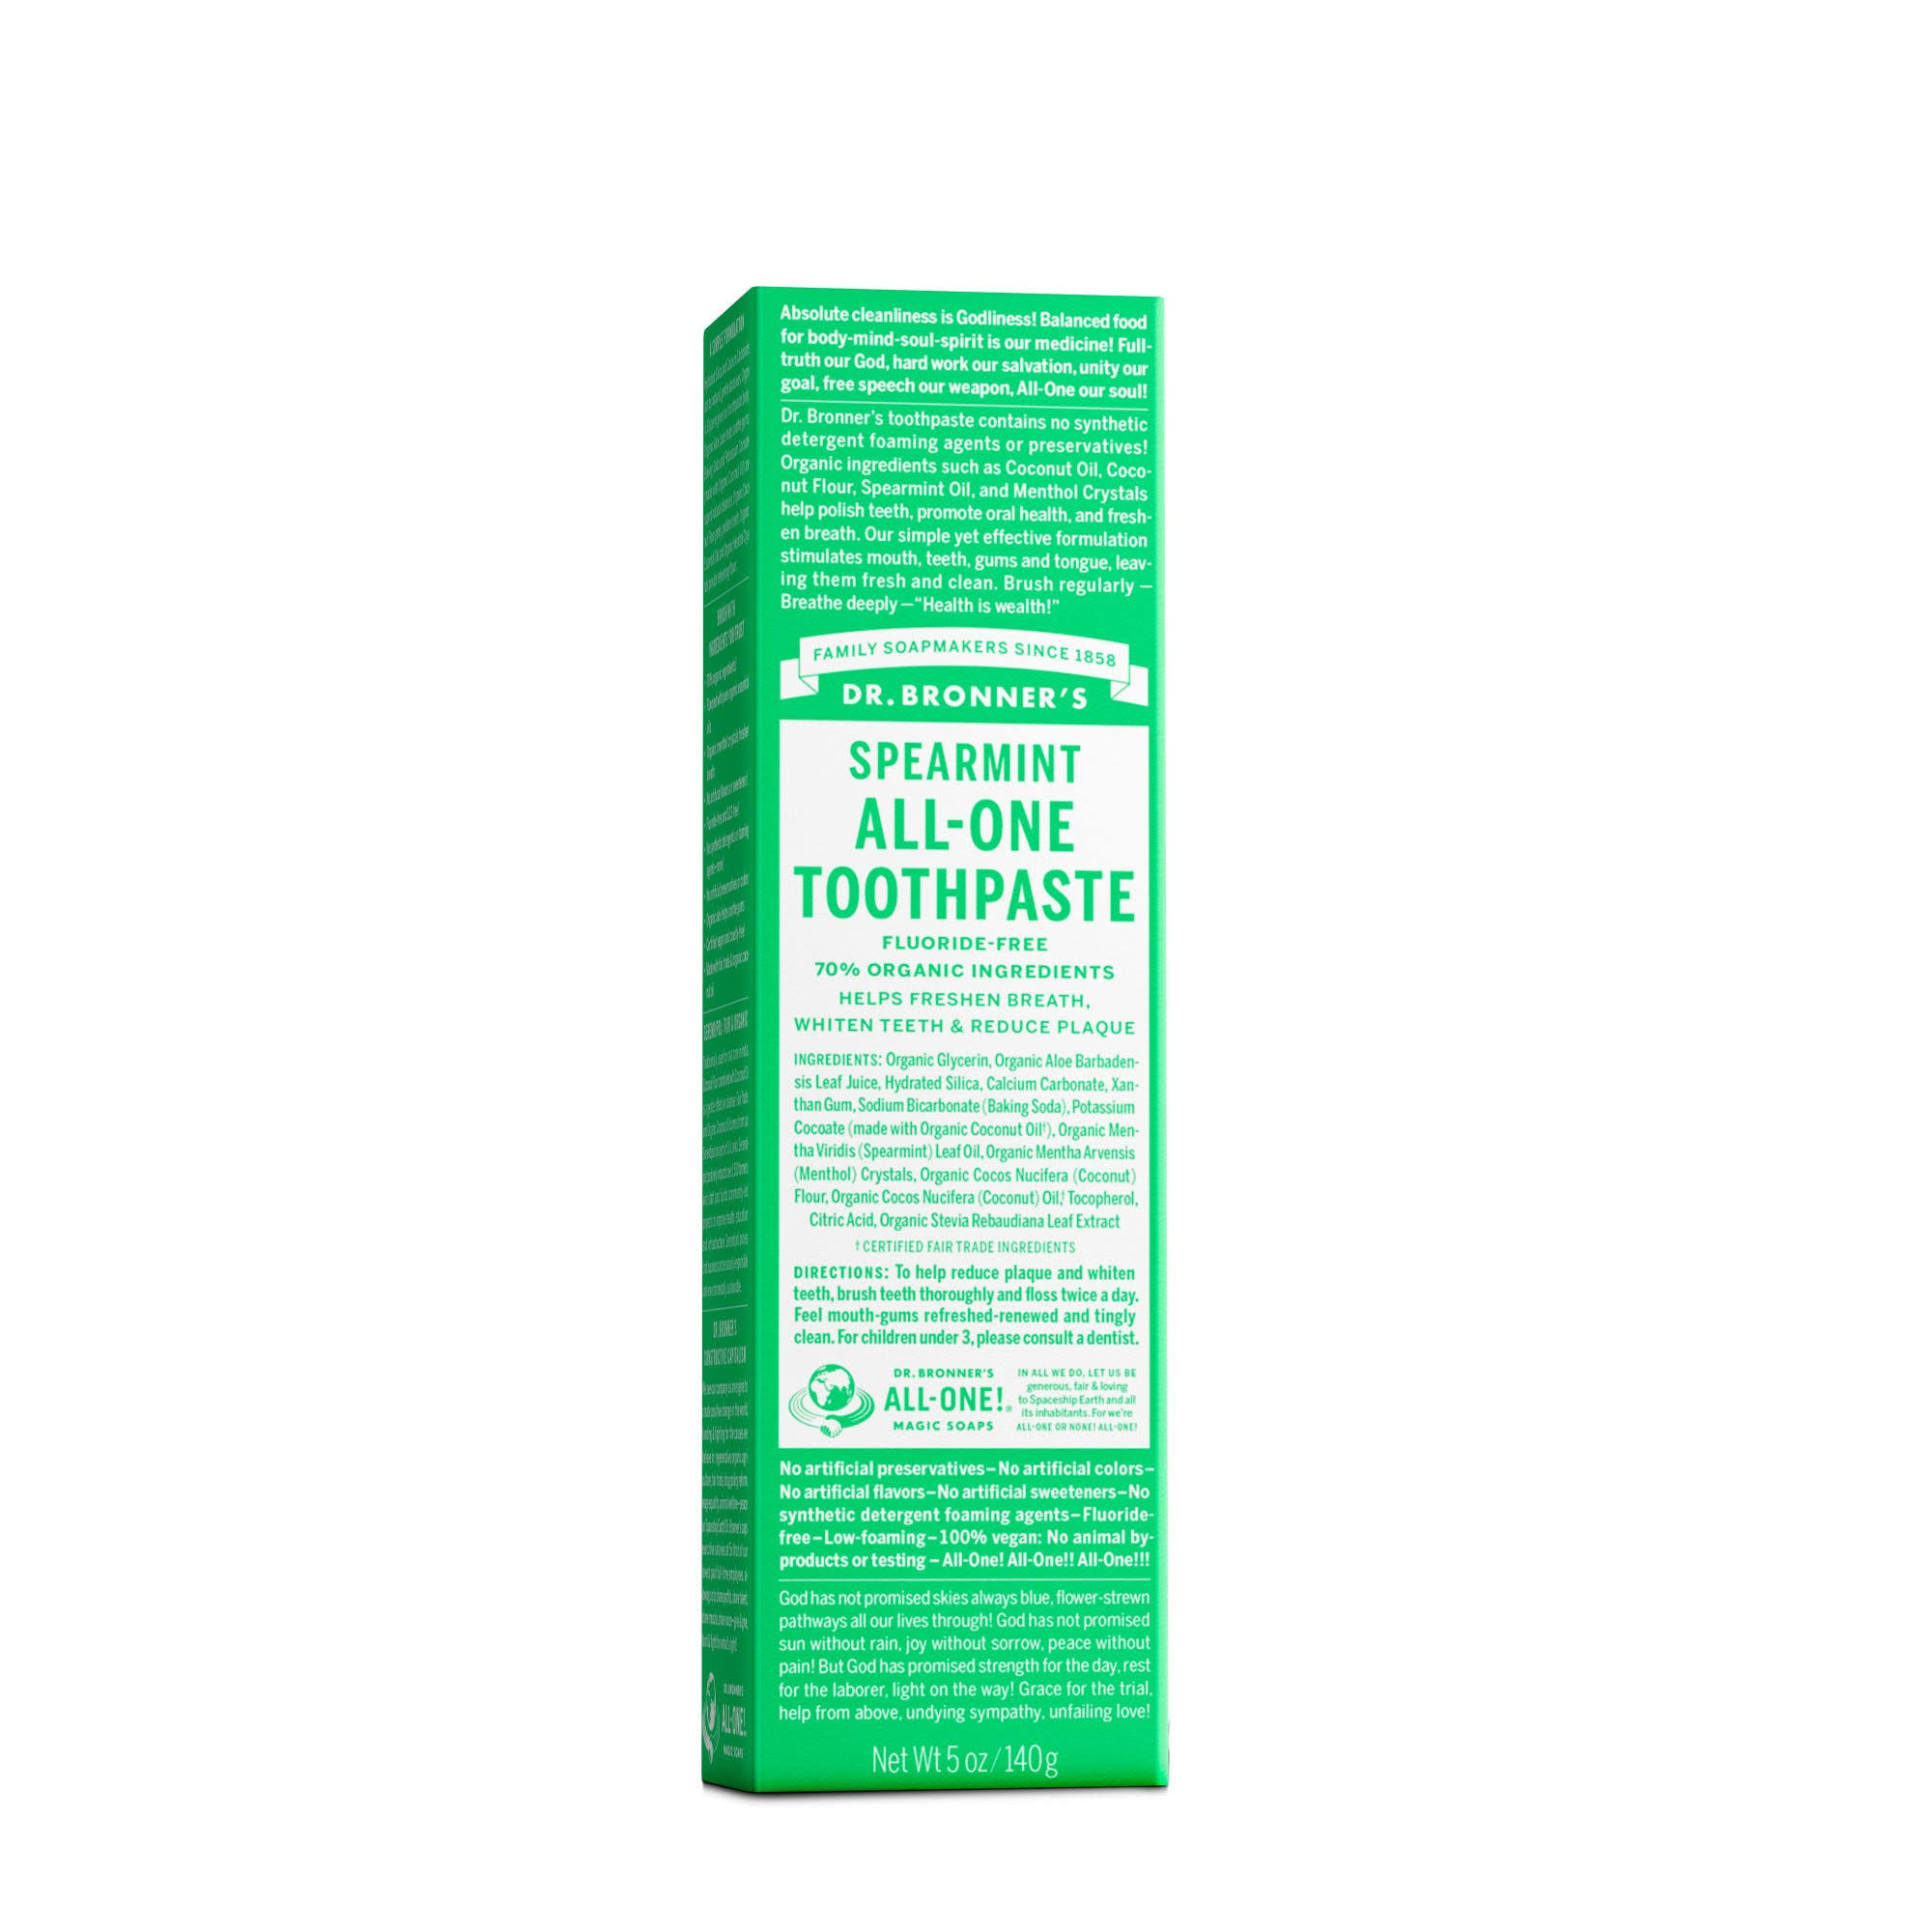 Dr. Bronner's Spearmint All-one Toothpaste